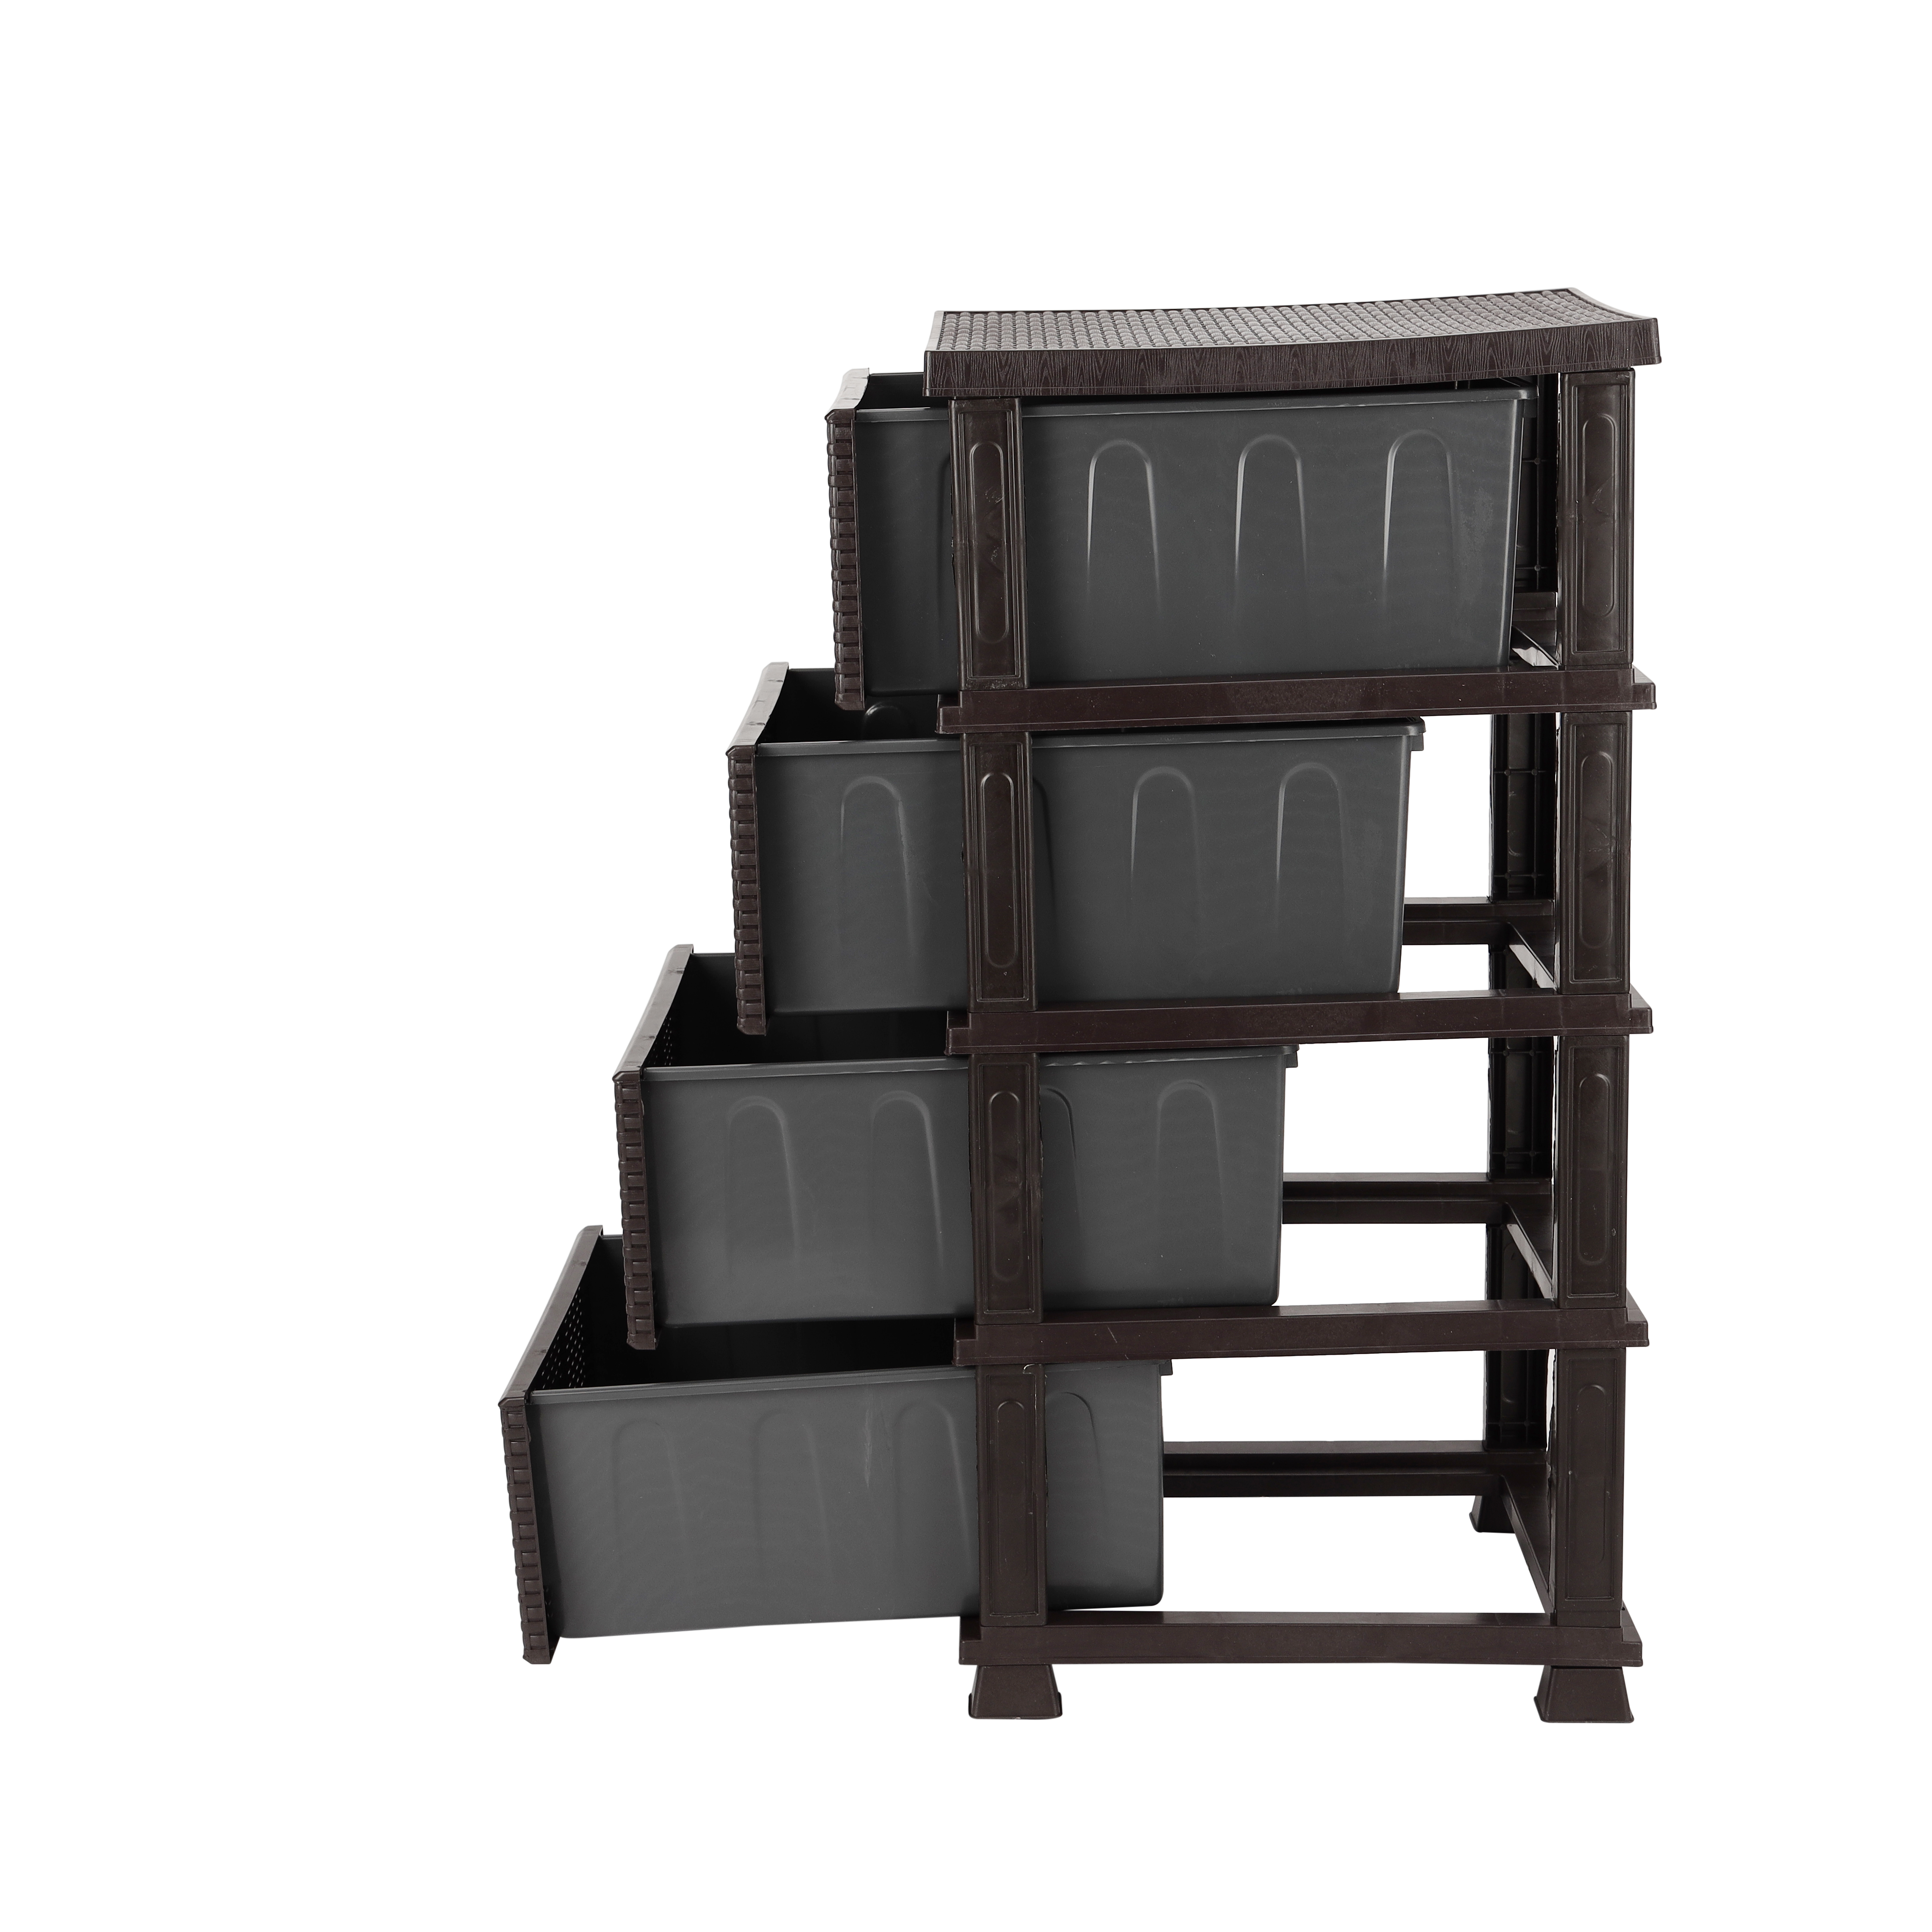 Royal Ford 4 Tier Rattan Storage Cabinet